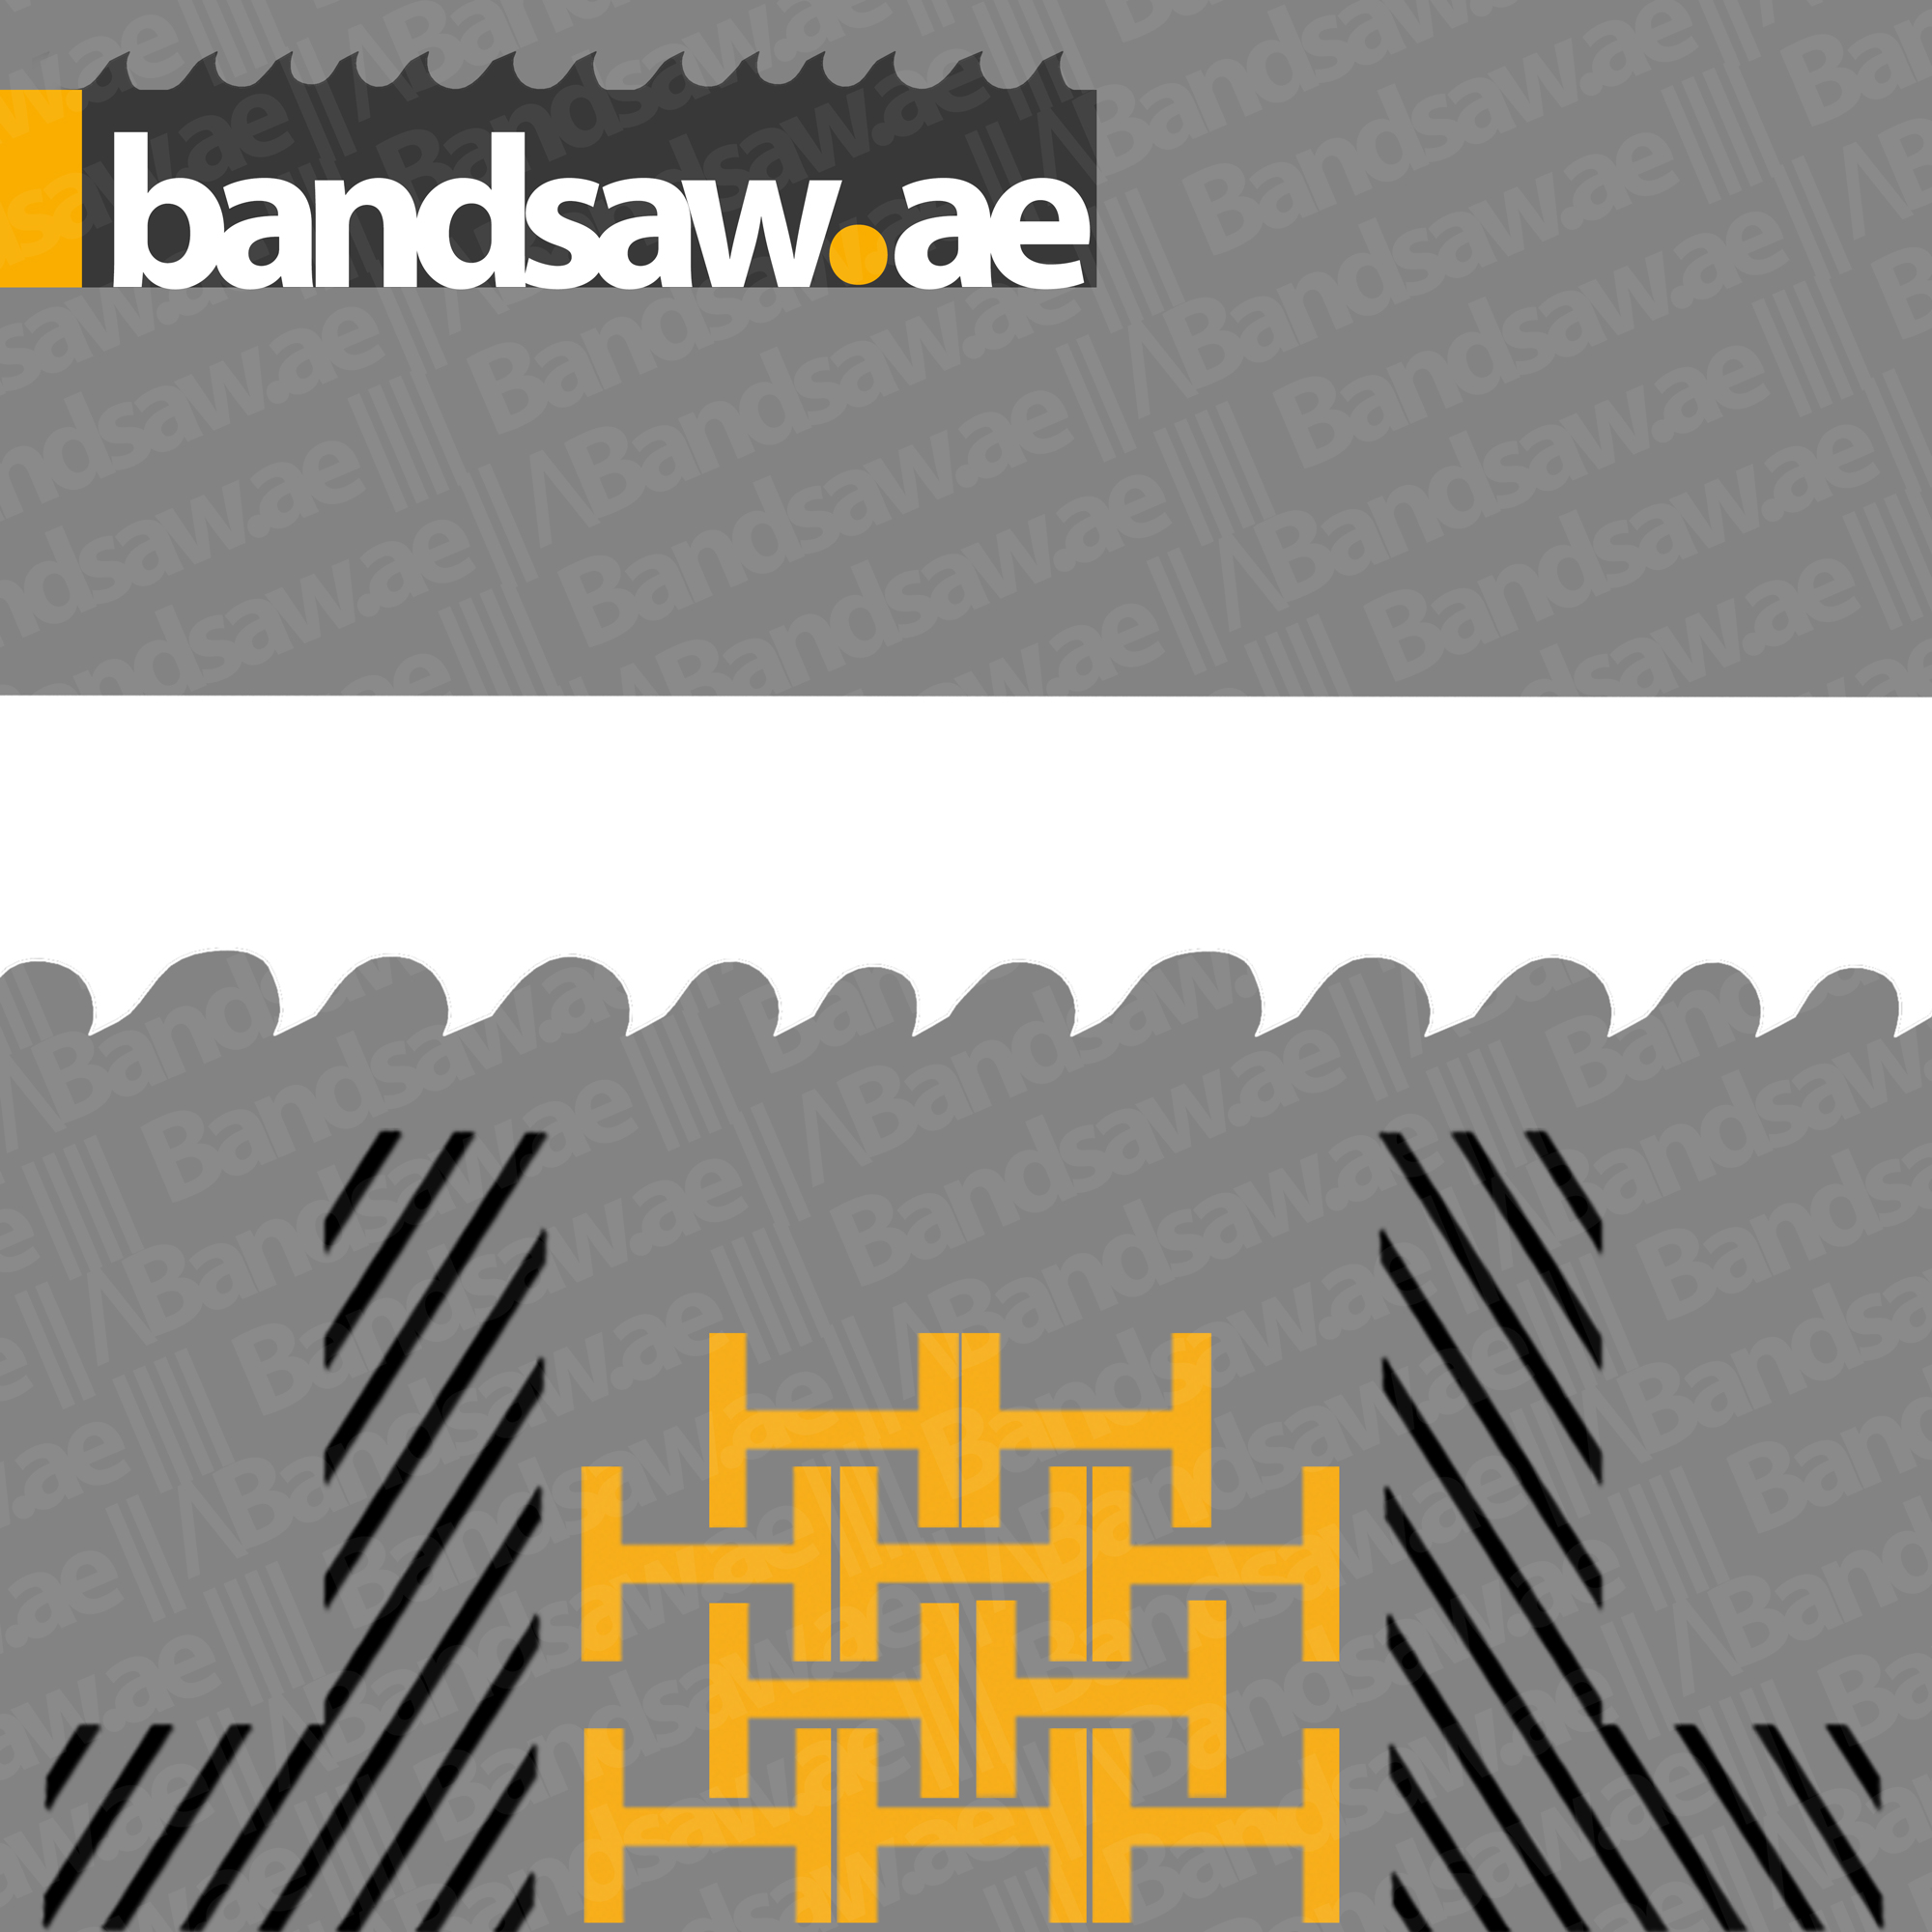 Starrett bandsaw blade,Yazd Bandsaw Blade, special tooth geometry, bi-metal construction, M42 High-Speed Steel, heat resistance, wear resistance, Rc 67-69 tooth hardness, positive rake design, production cutting, non-production cutting, solids, tubing, medium alloy, stainless steel, complementary products, coolant liquid, bandsaw machines, specialized blades, food processing industry, sizes 19 x 0.9 mm, 27 x 0.9 mm, 34 x 1.1 mm, 41 x 1.3 mm, mass quantity buyers, active factories, dealers, Middle East, North Africa, South Asia.